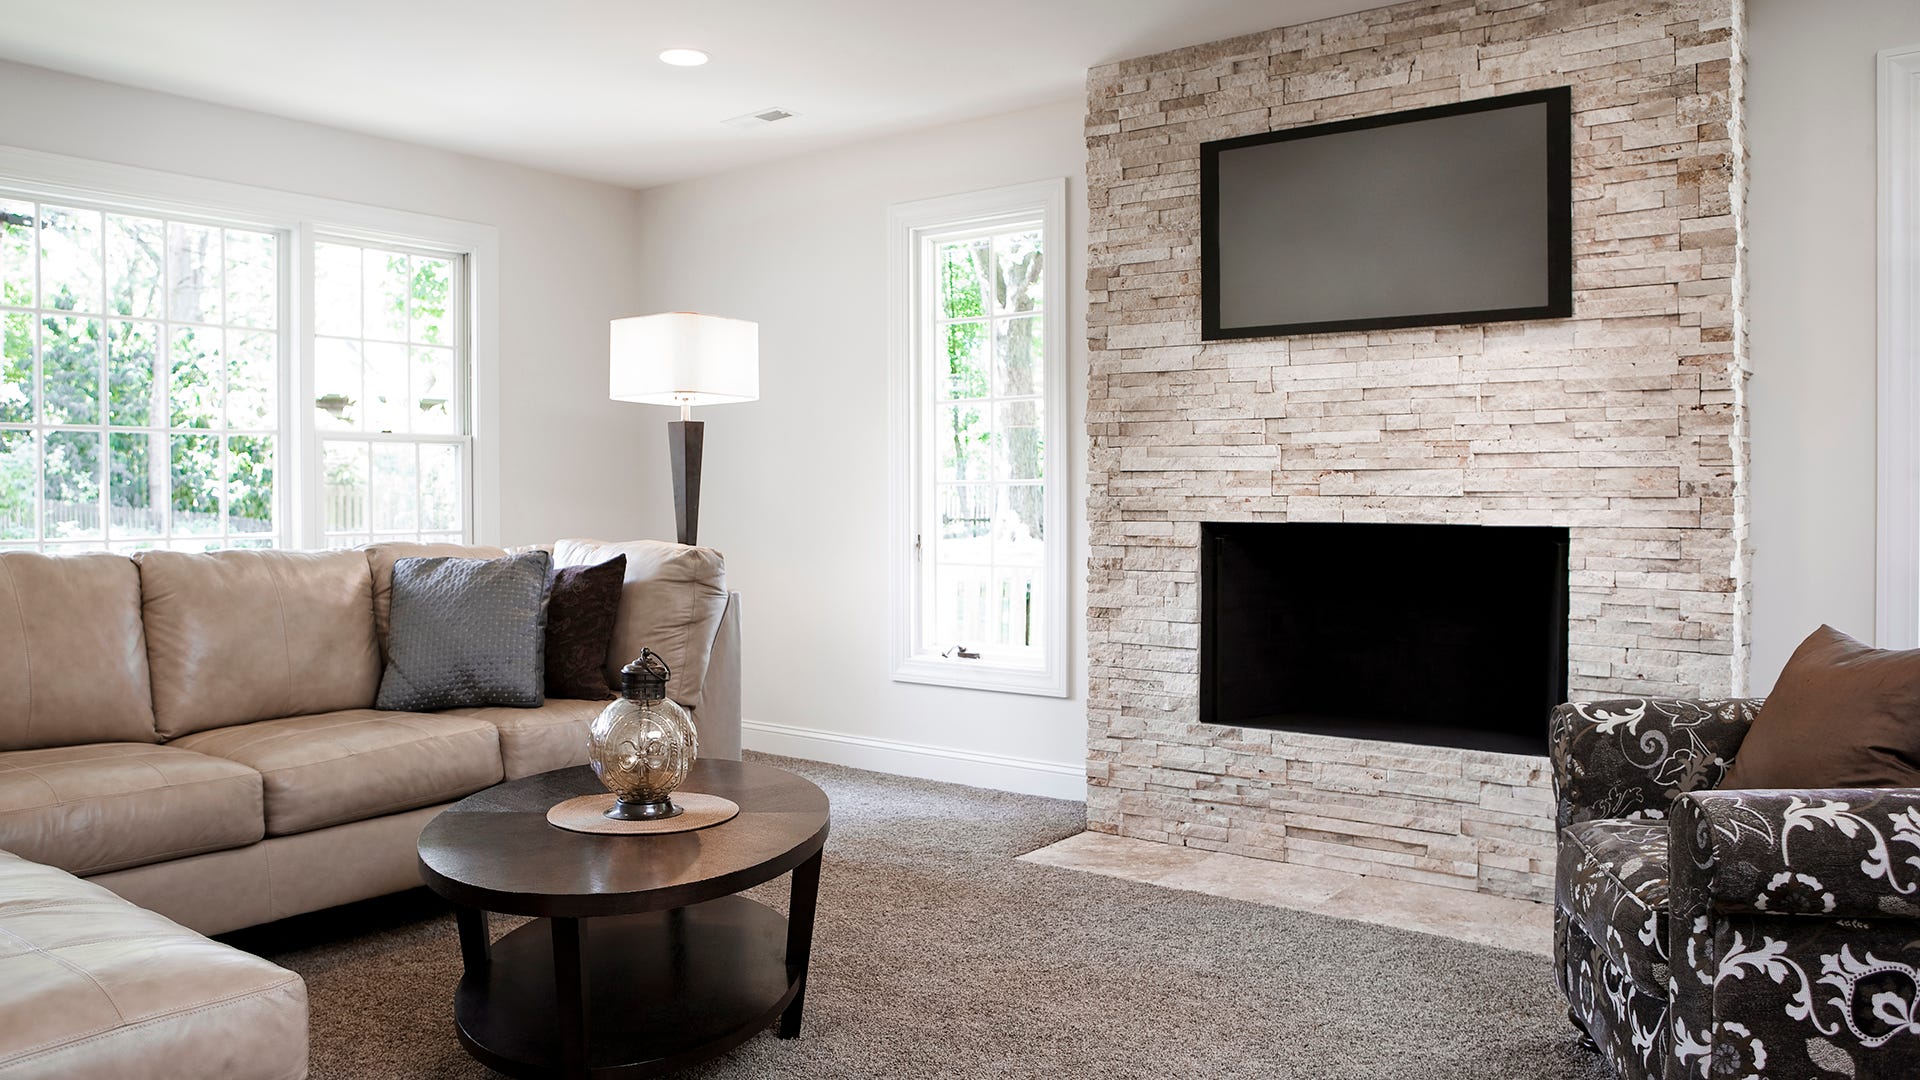 Mounting your TV above the fireplace is actually a terrible idea